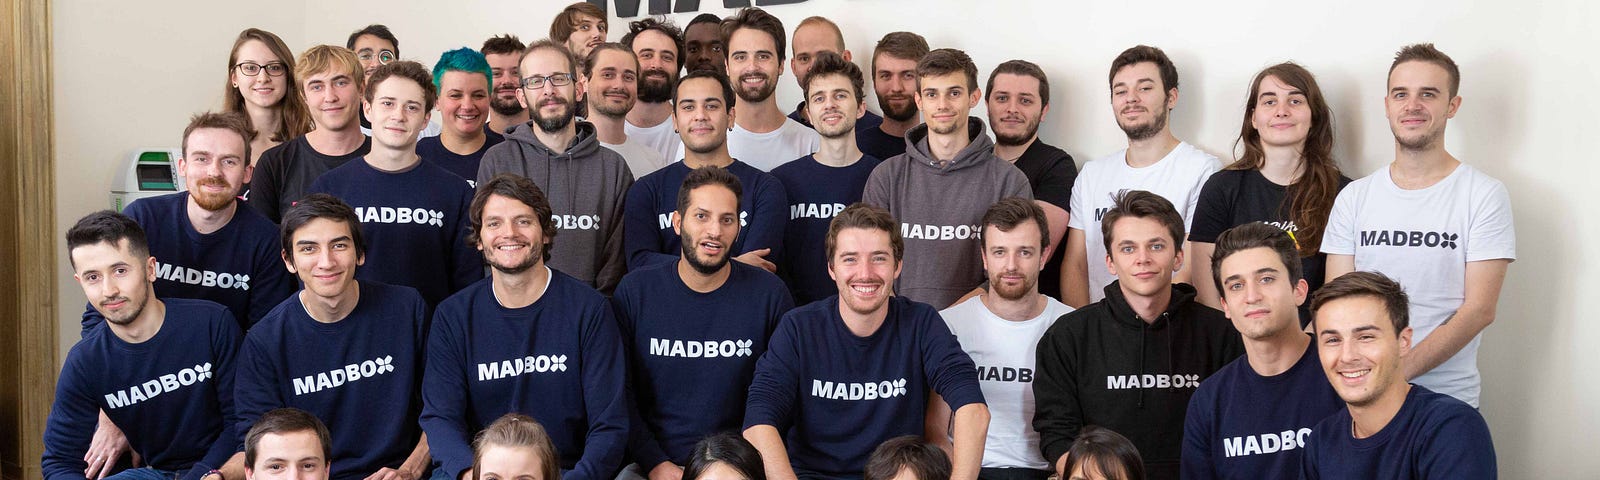 Here you will see the team of people at Madbox Paris gathered for a group photo. Bright with smiles and wearing Madbox branded clothing, they’re ready to great mad things. Picture taken in 2019.